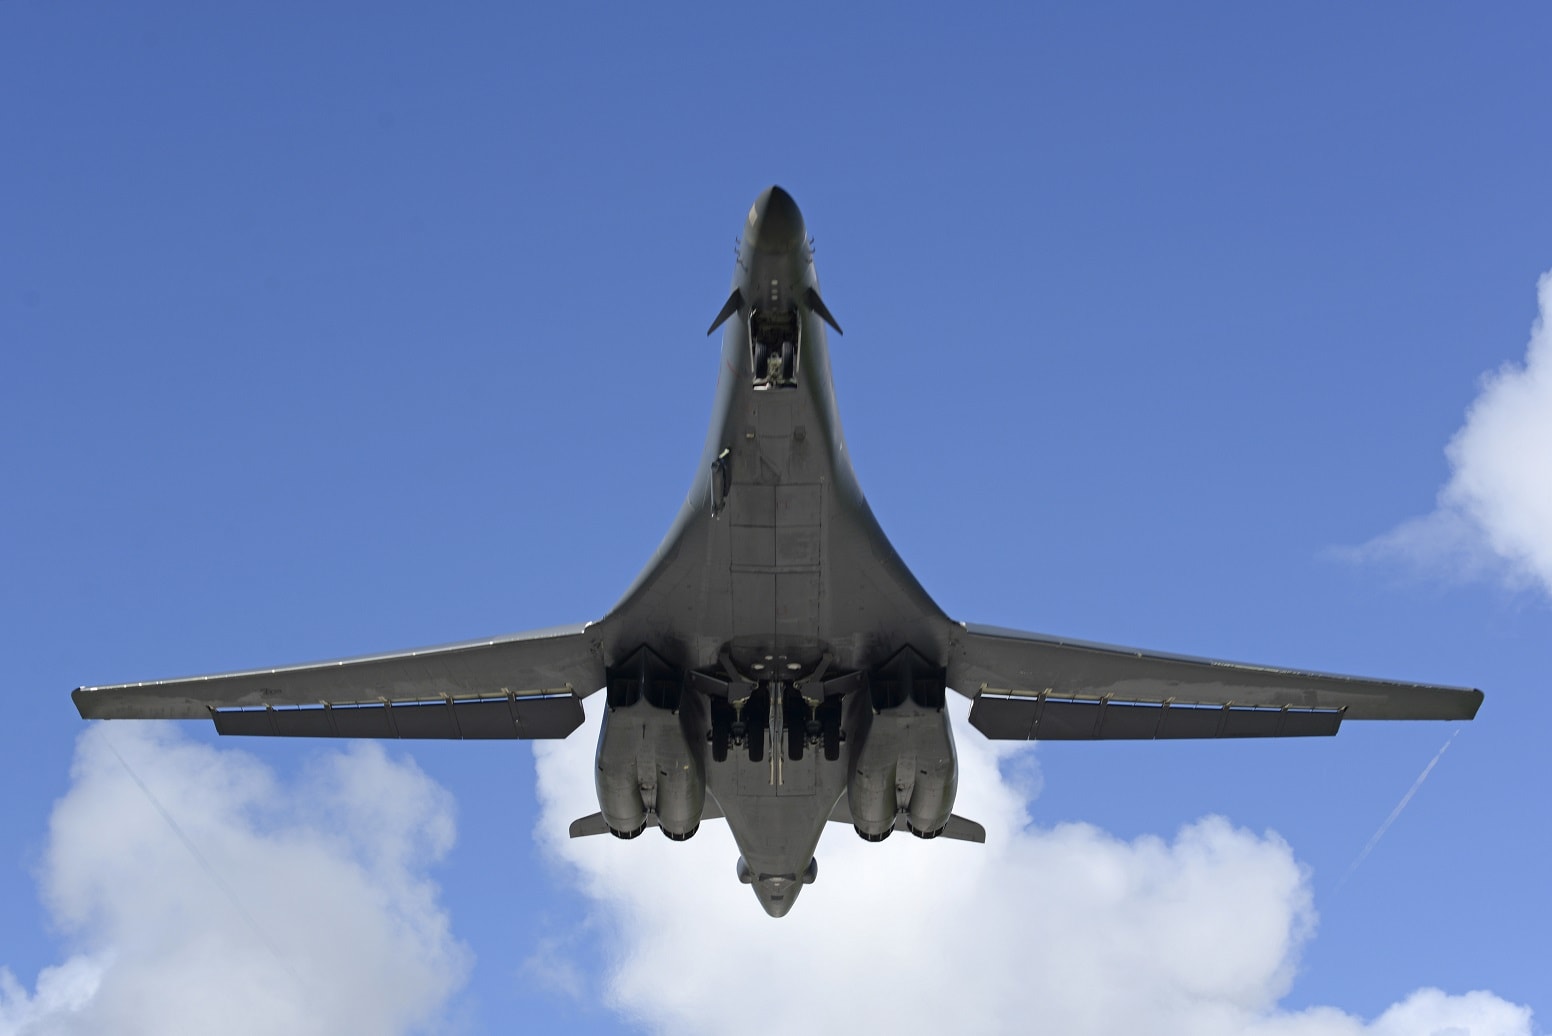 Only six U.S. Air Force B-1 heavy bombers ready for combat